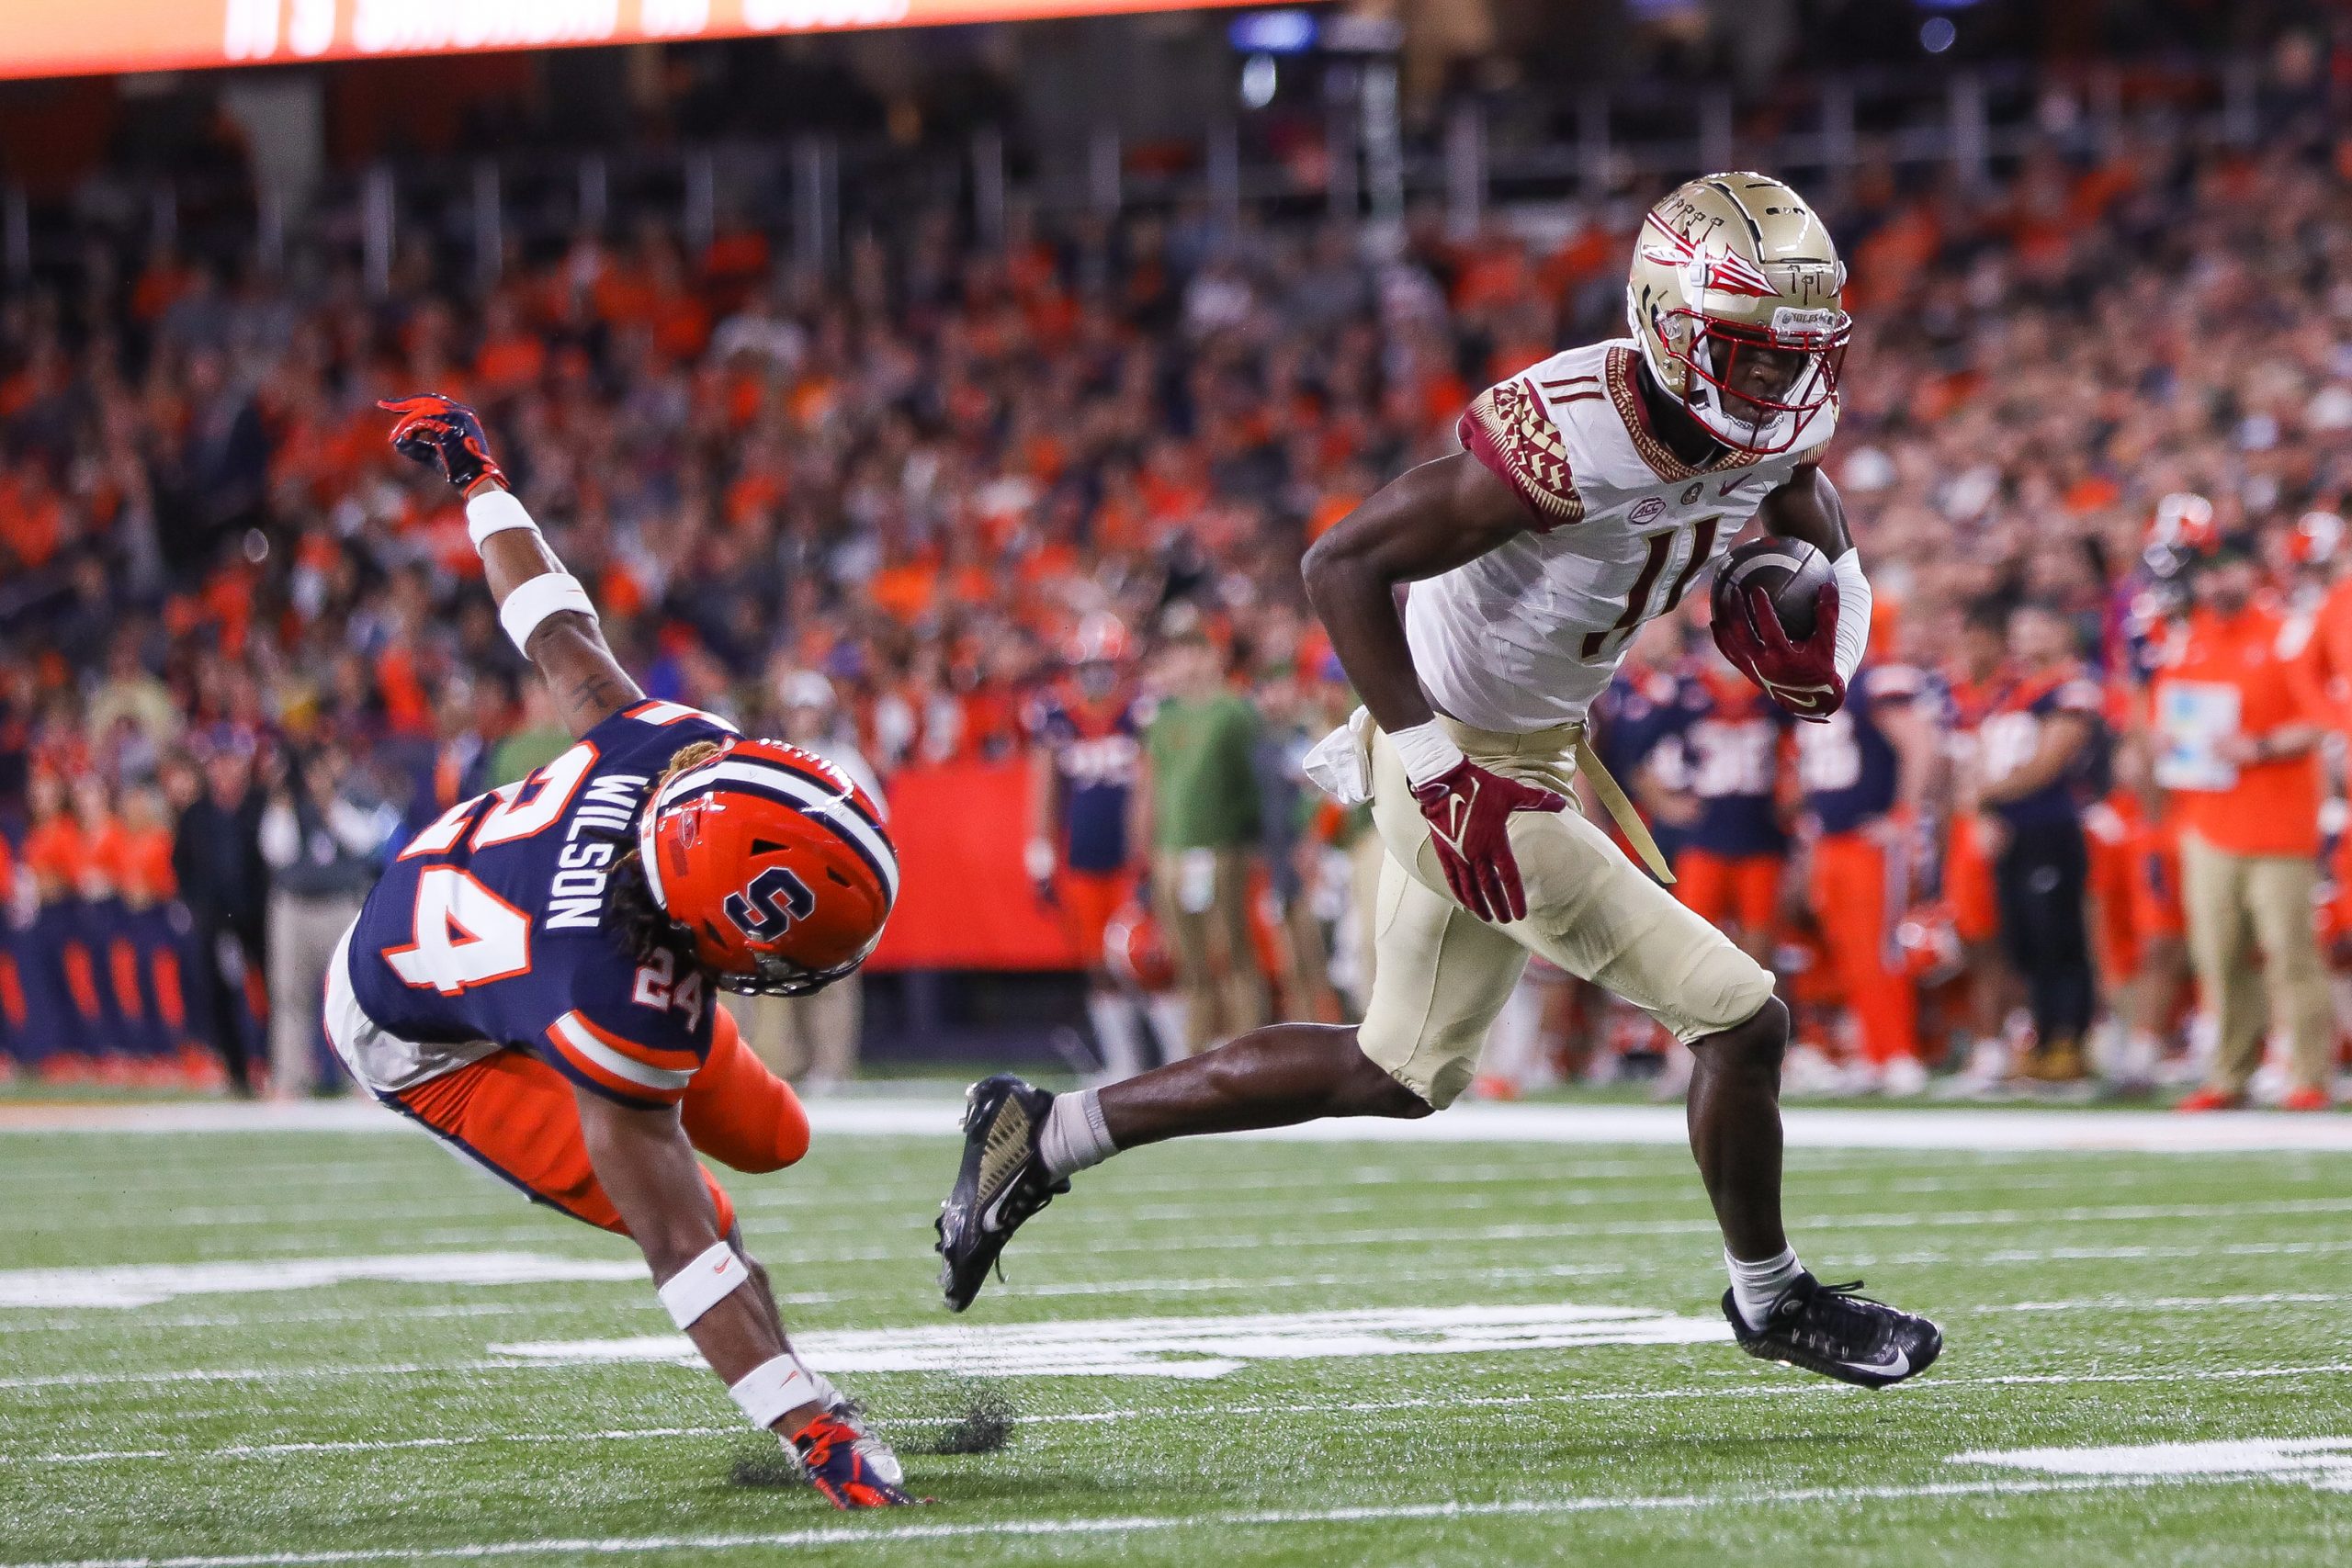 Florida State's Malik McClain (11) escapes Syracuse's Jeremiah Wilson (24) for a touchdown during an ACC football game Saturday night at the JMA Wireless Dome.